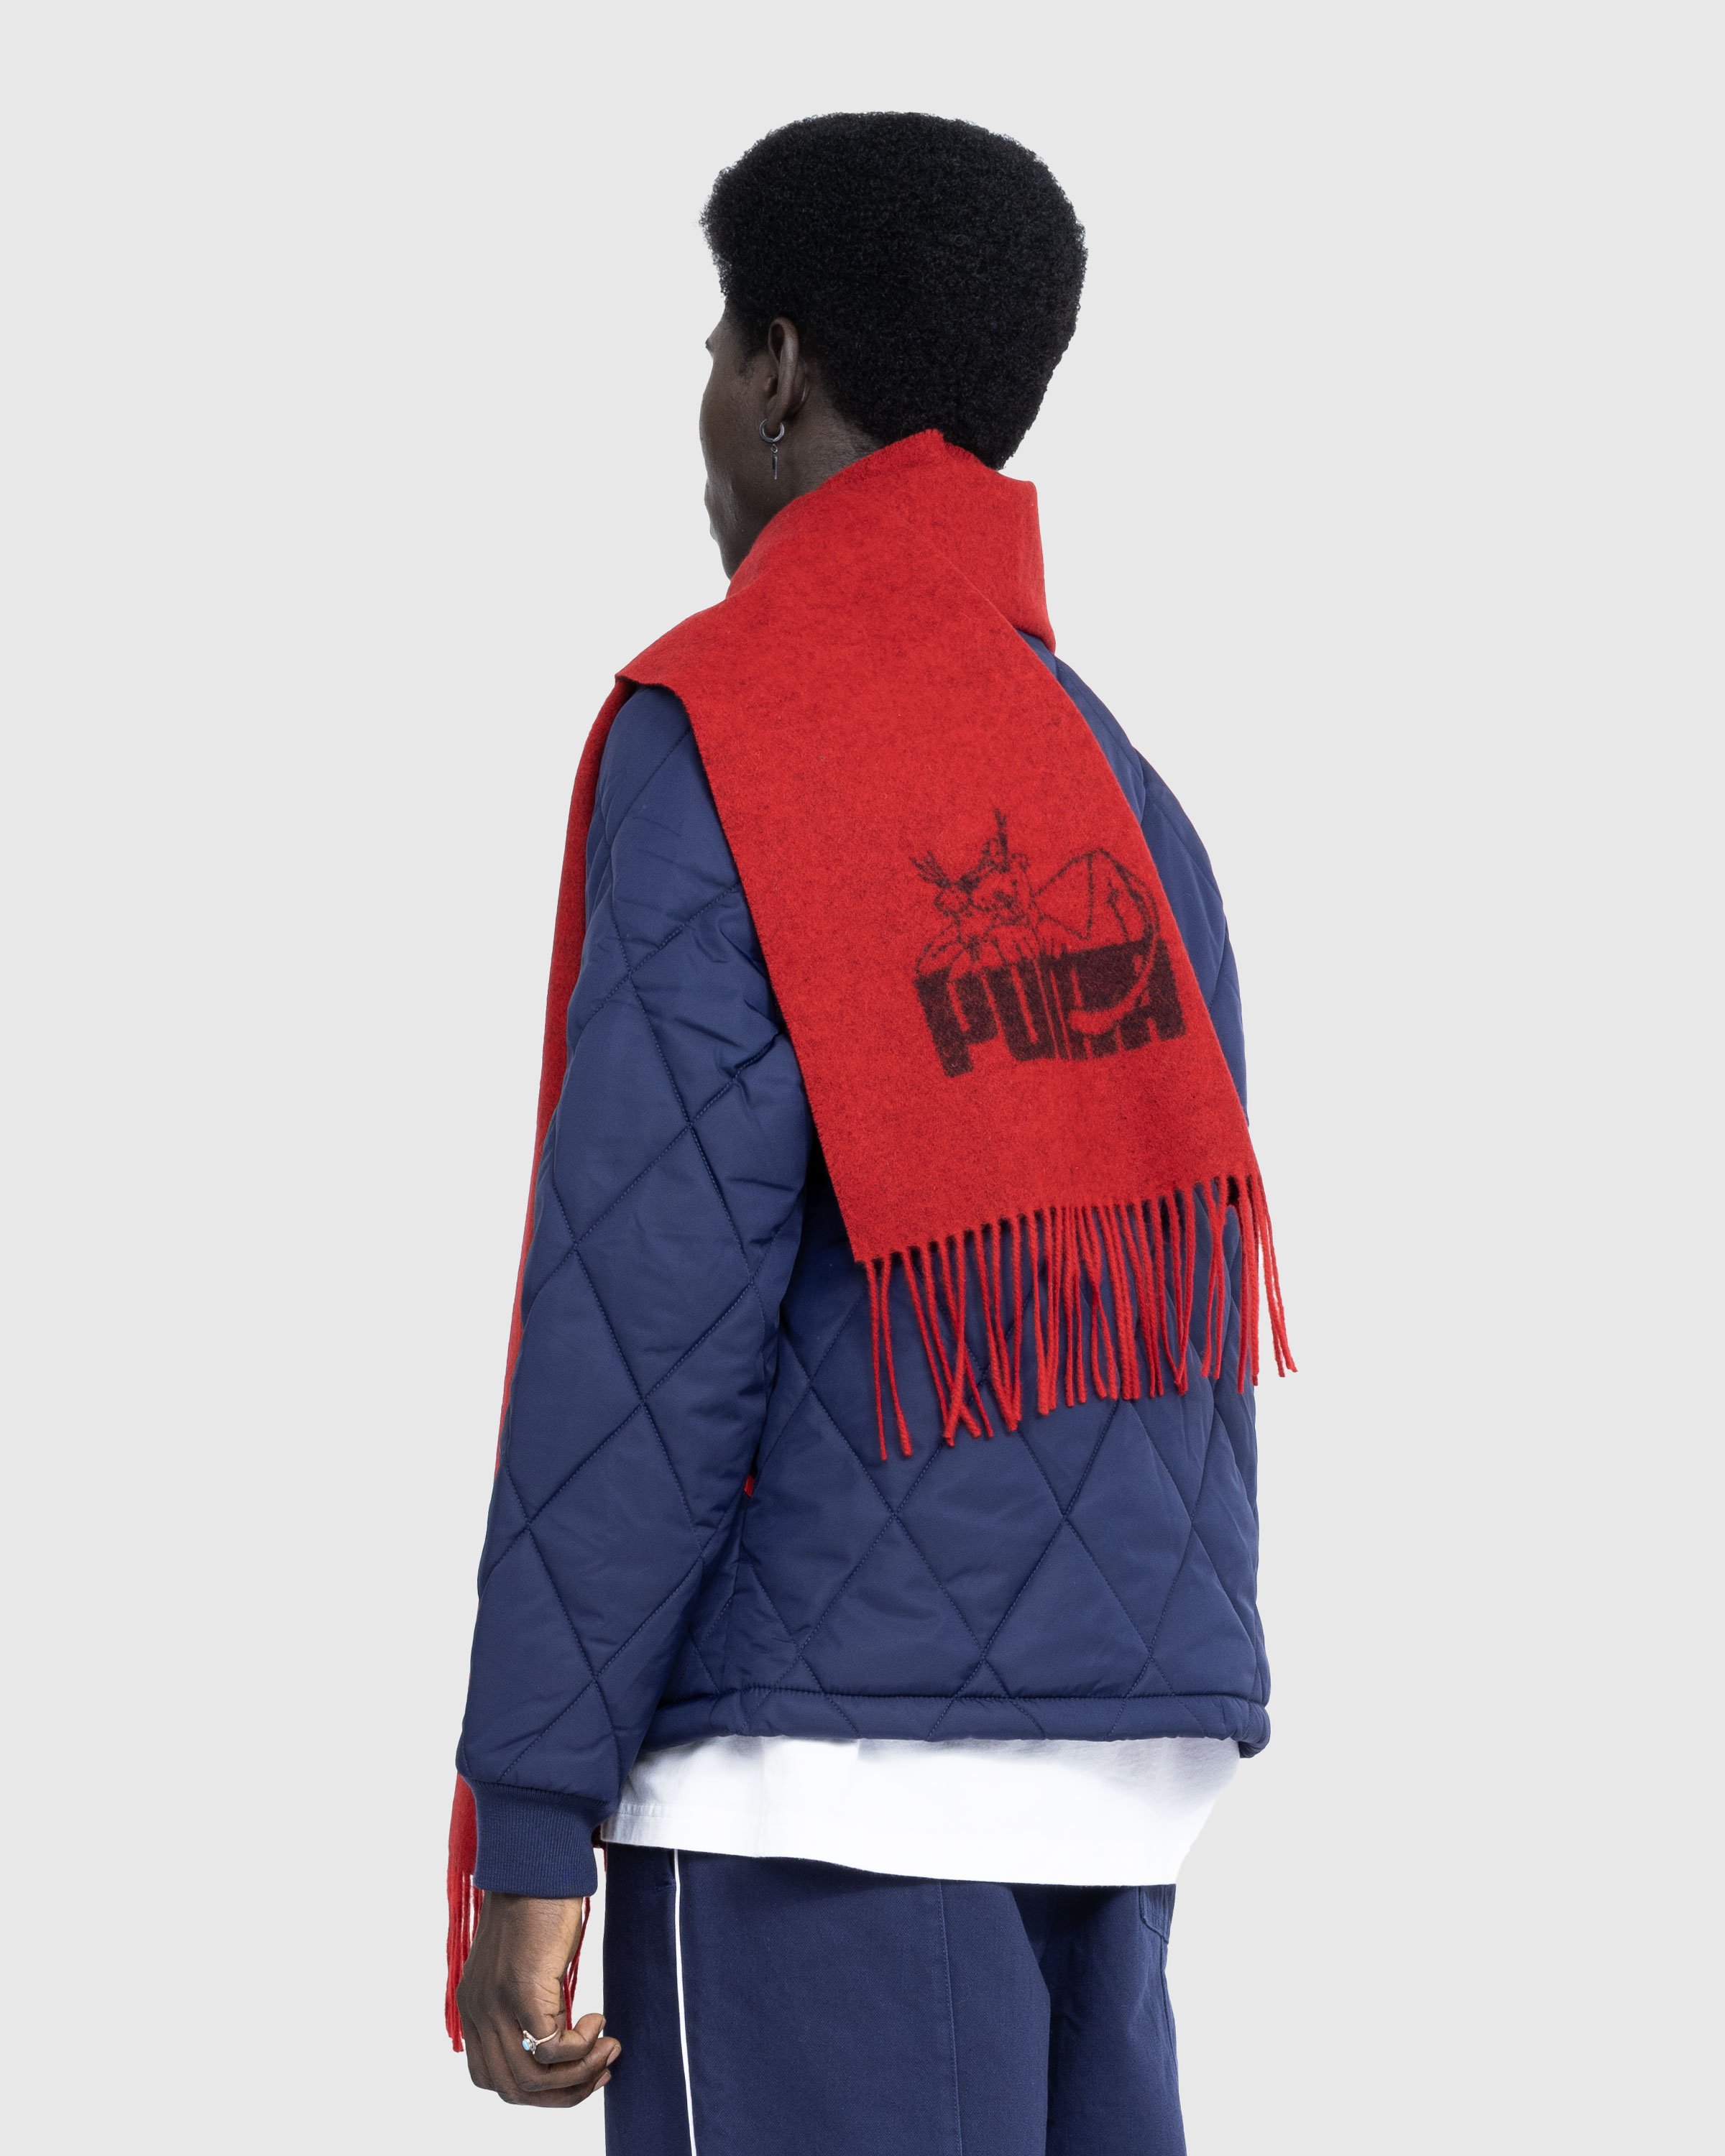 Puma x Noah - Wool Scarf Red - Accessories - Red - Image 4